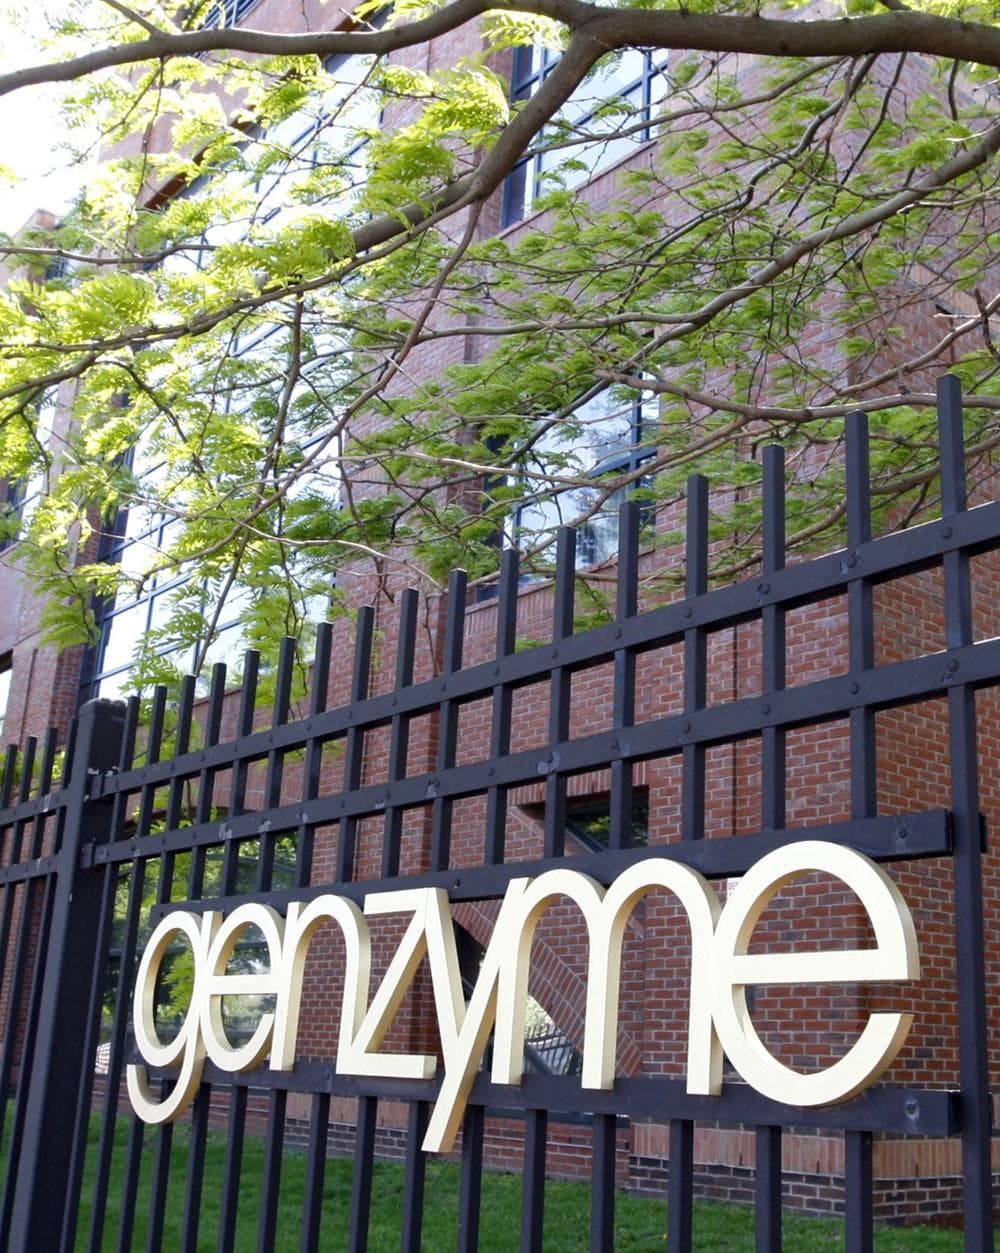 Genzyme's manufacturing facility in Allston. (AP)